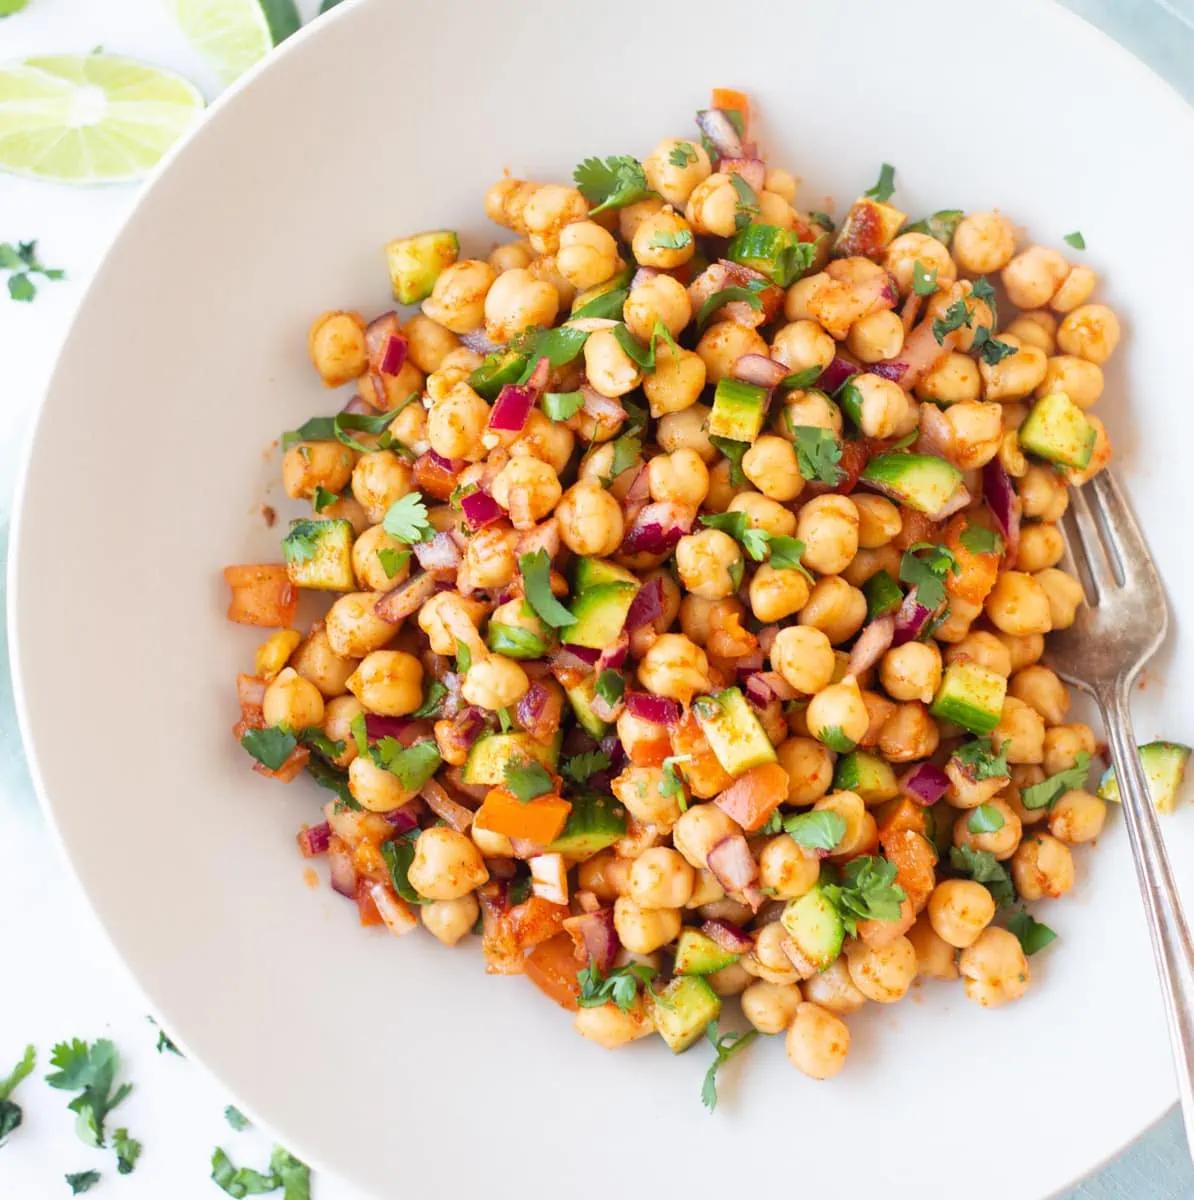 Healthy Chickpea Salad wot veggies and spices in a bowl